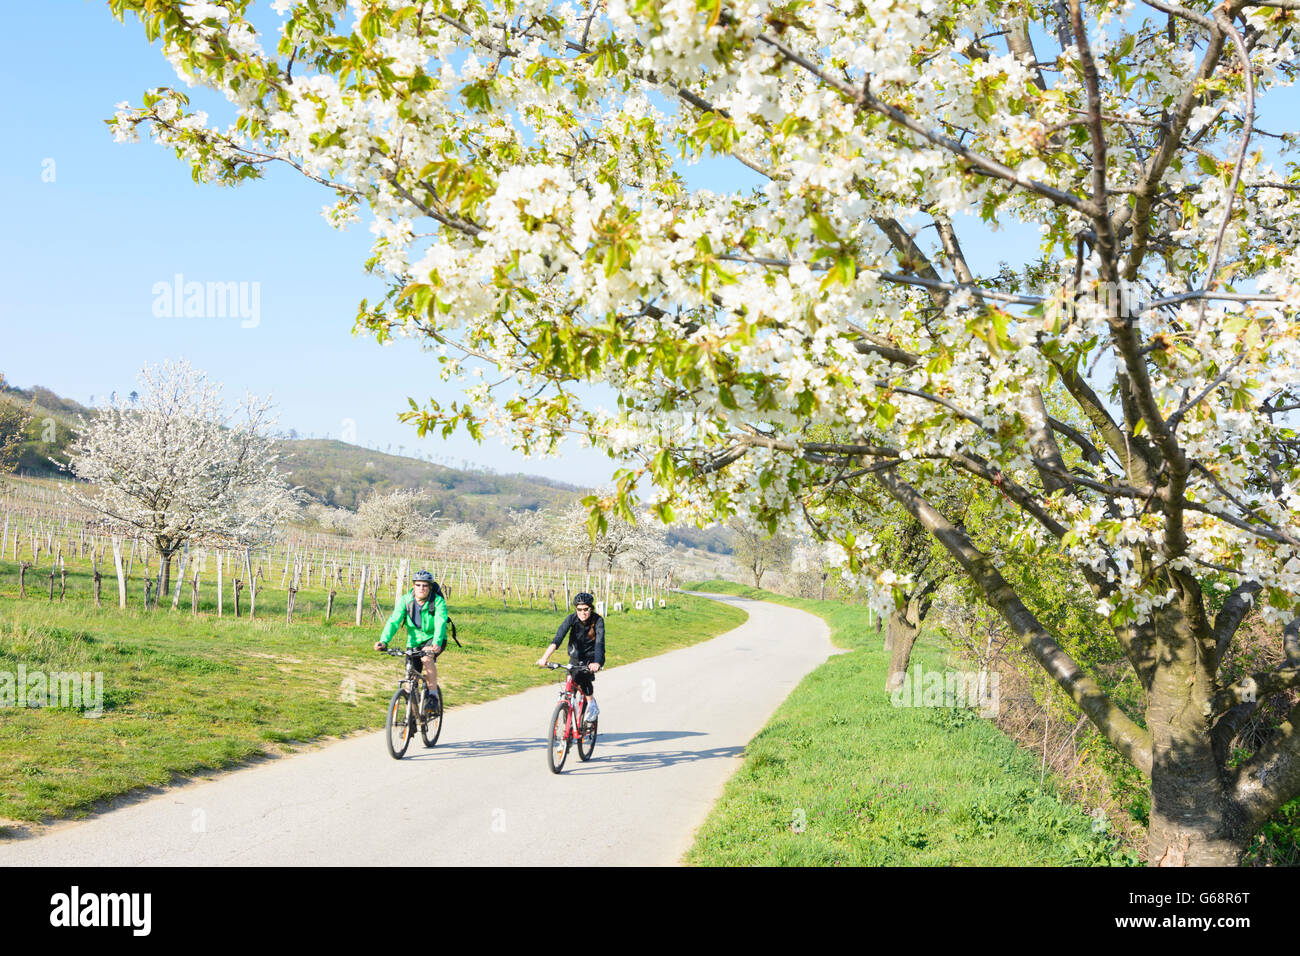 Cherry blossom on 'cherry blossom way' with vineyards and cyclists, Donnerskirchen, Austria, Burgenland, Neusiedler See Stock Photo